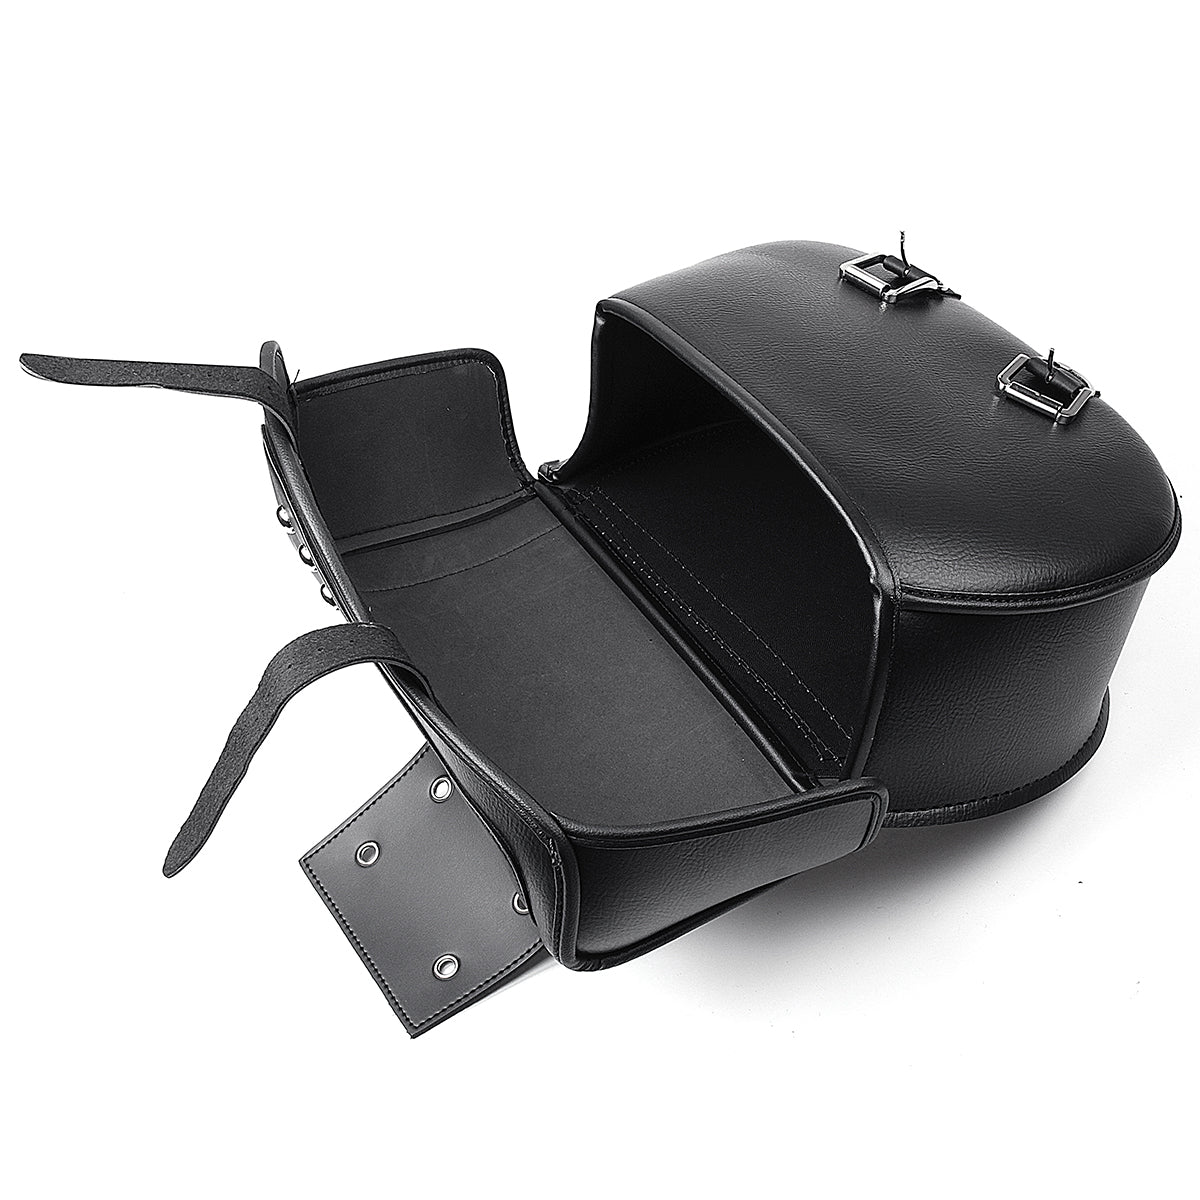 Black Motorcycle PU Leather Luggage Saddlebags Black For Sportster XL883 1200